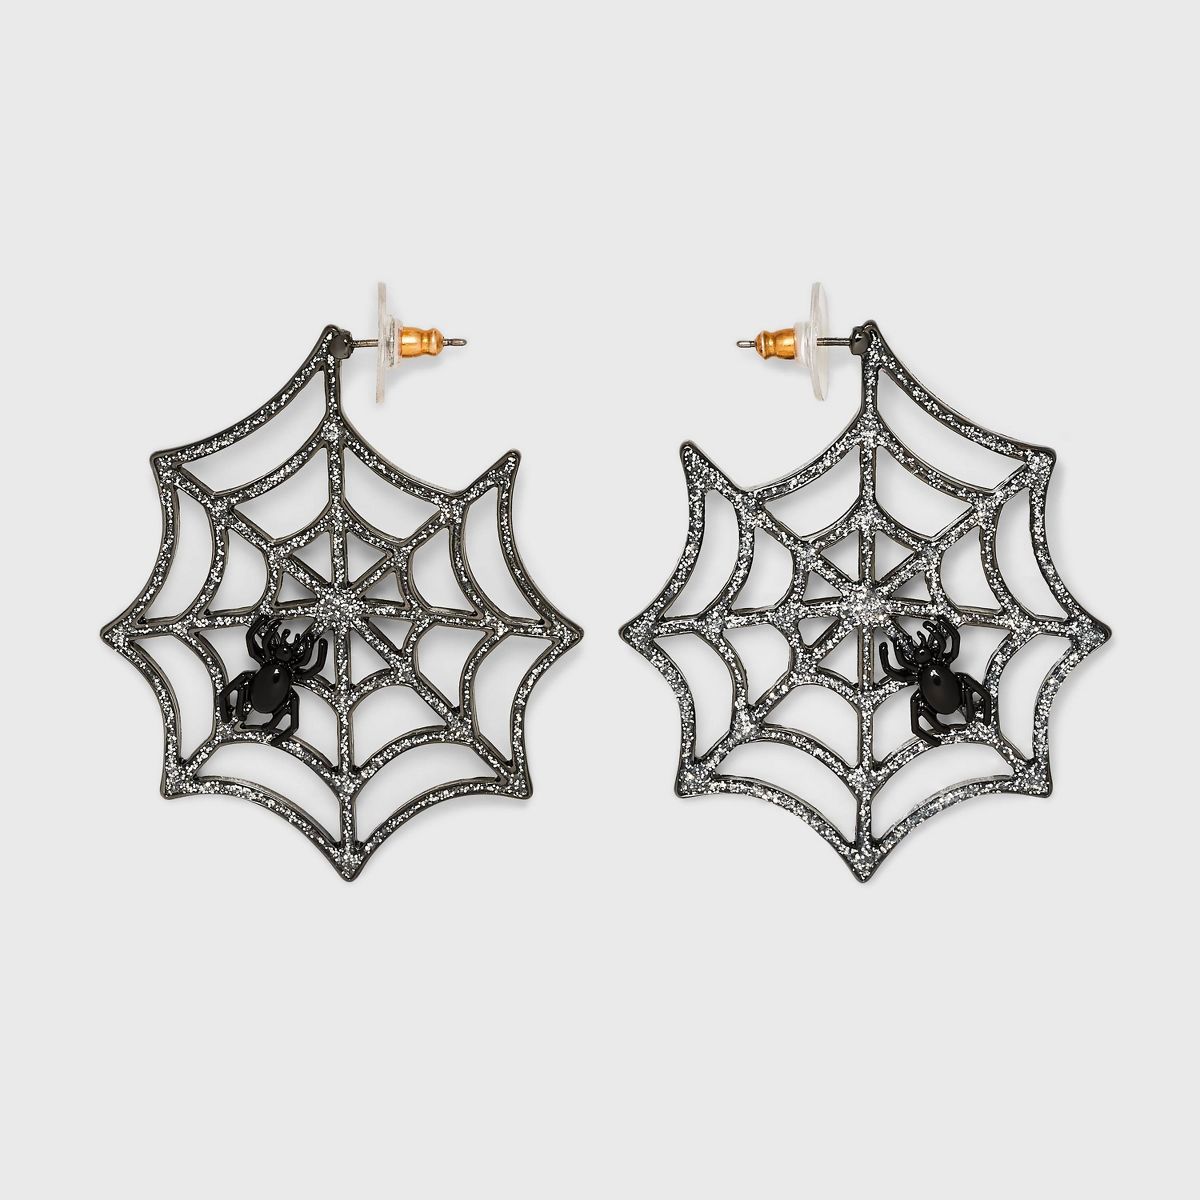 SUGARFIX by BaubleBar "Stuck On You" Statement Earrings - Silver | Target